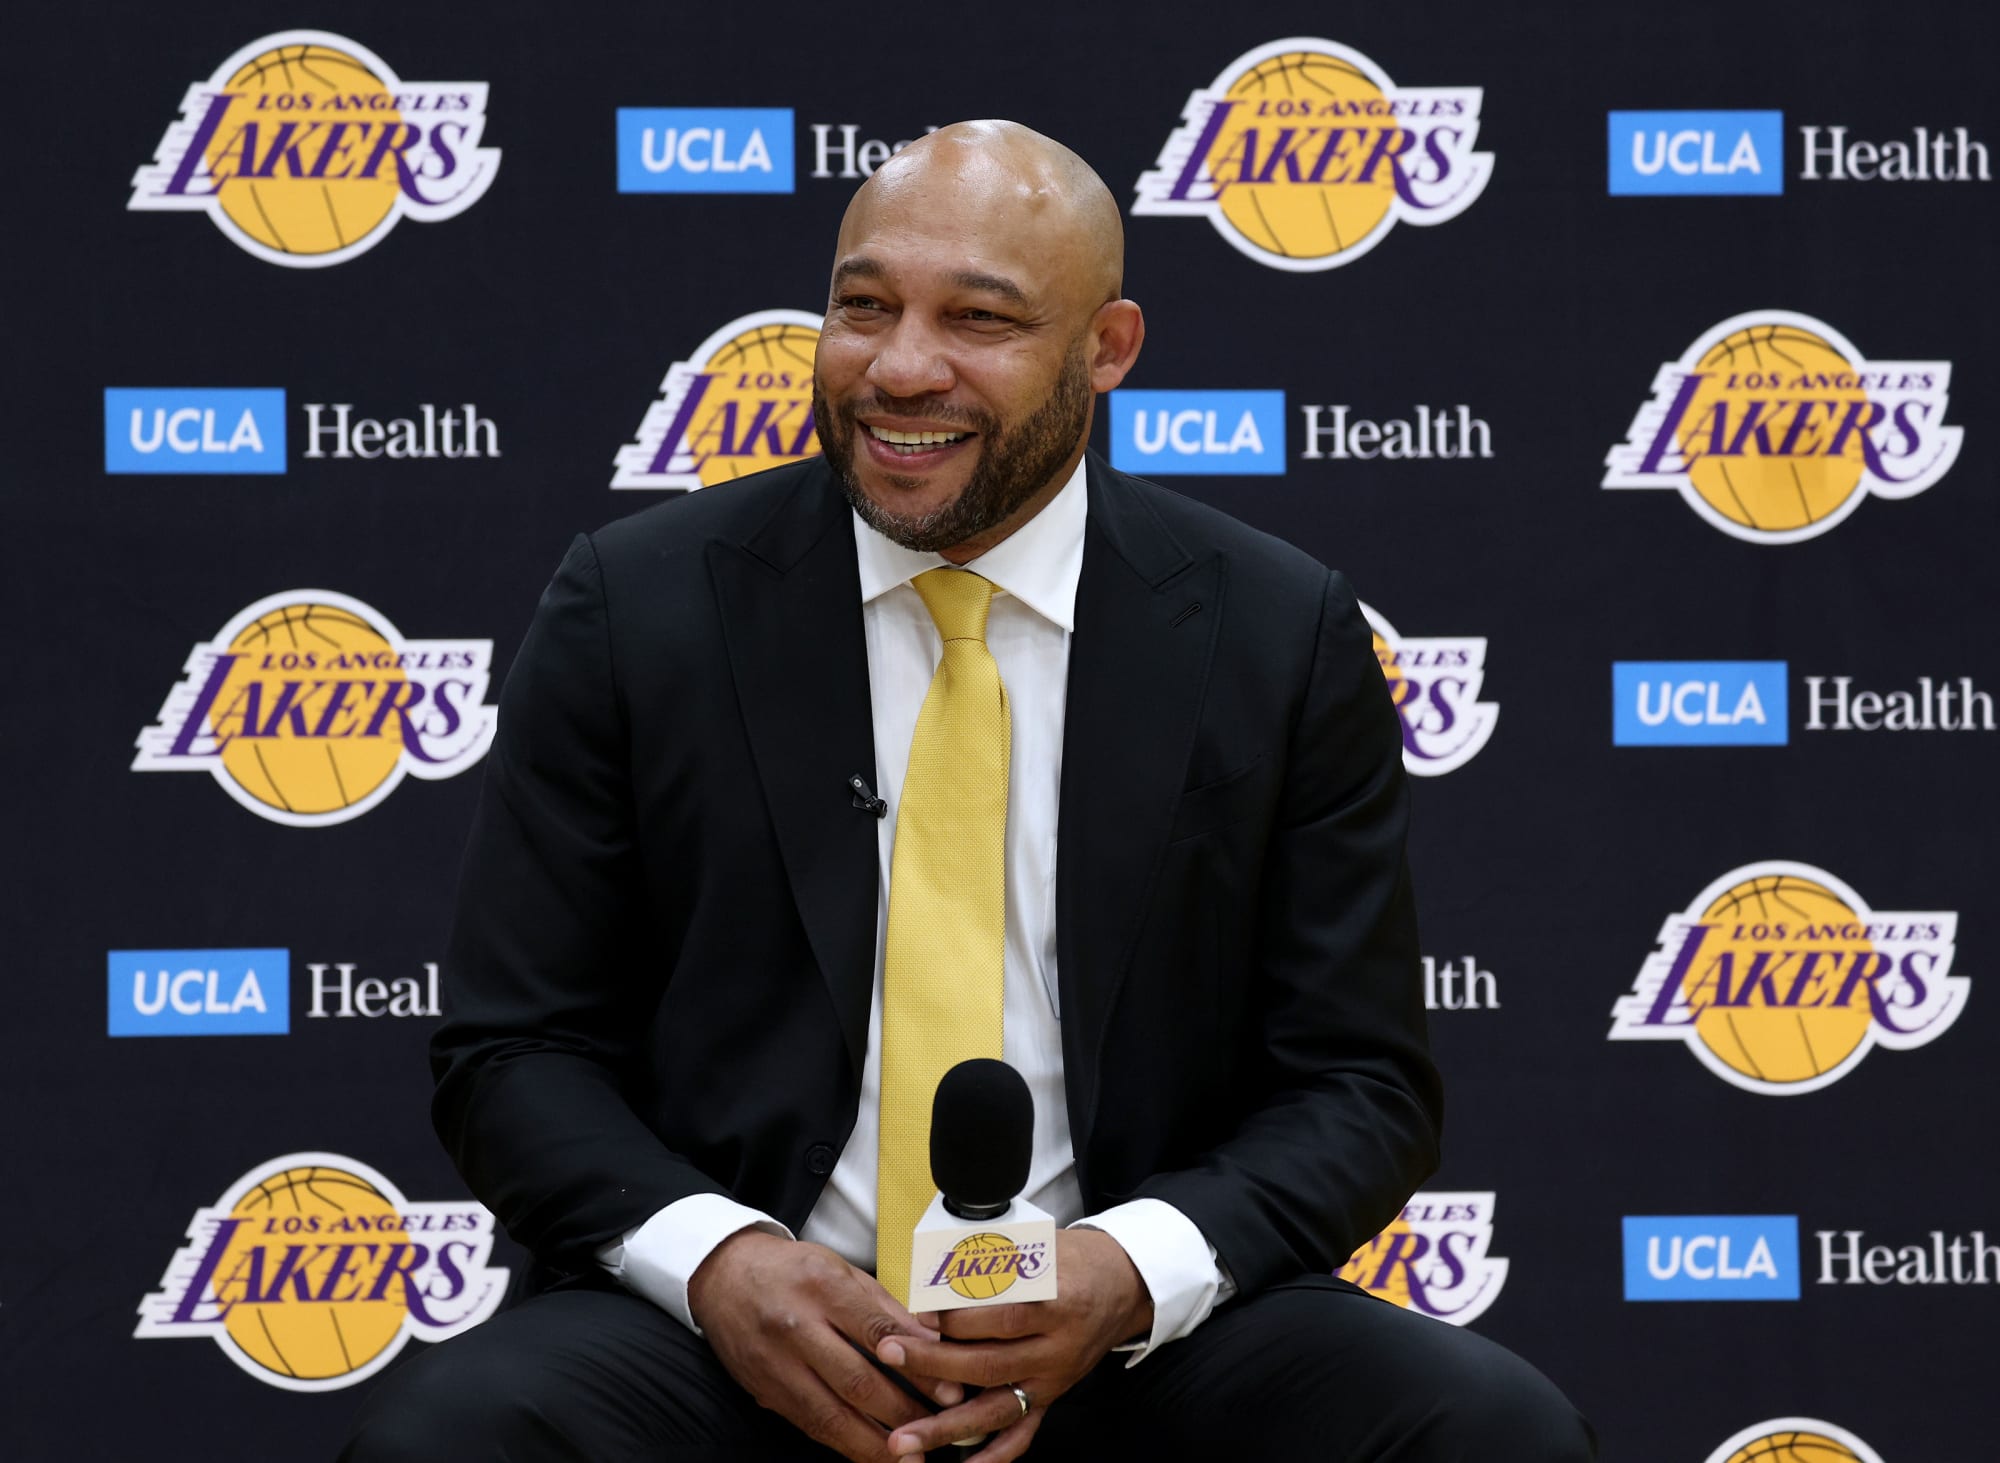 New Lakers trainer sounds hopelessly constructive about Russell Westbrook